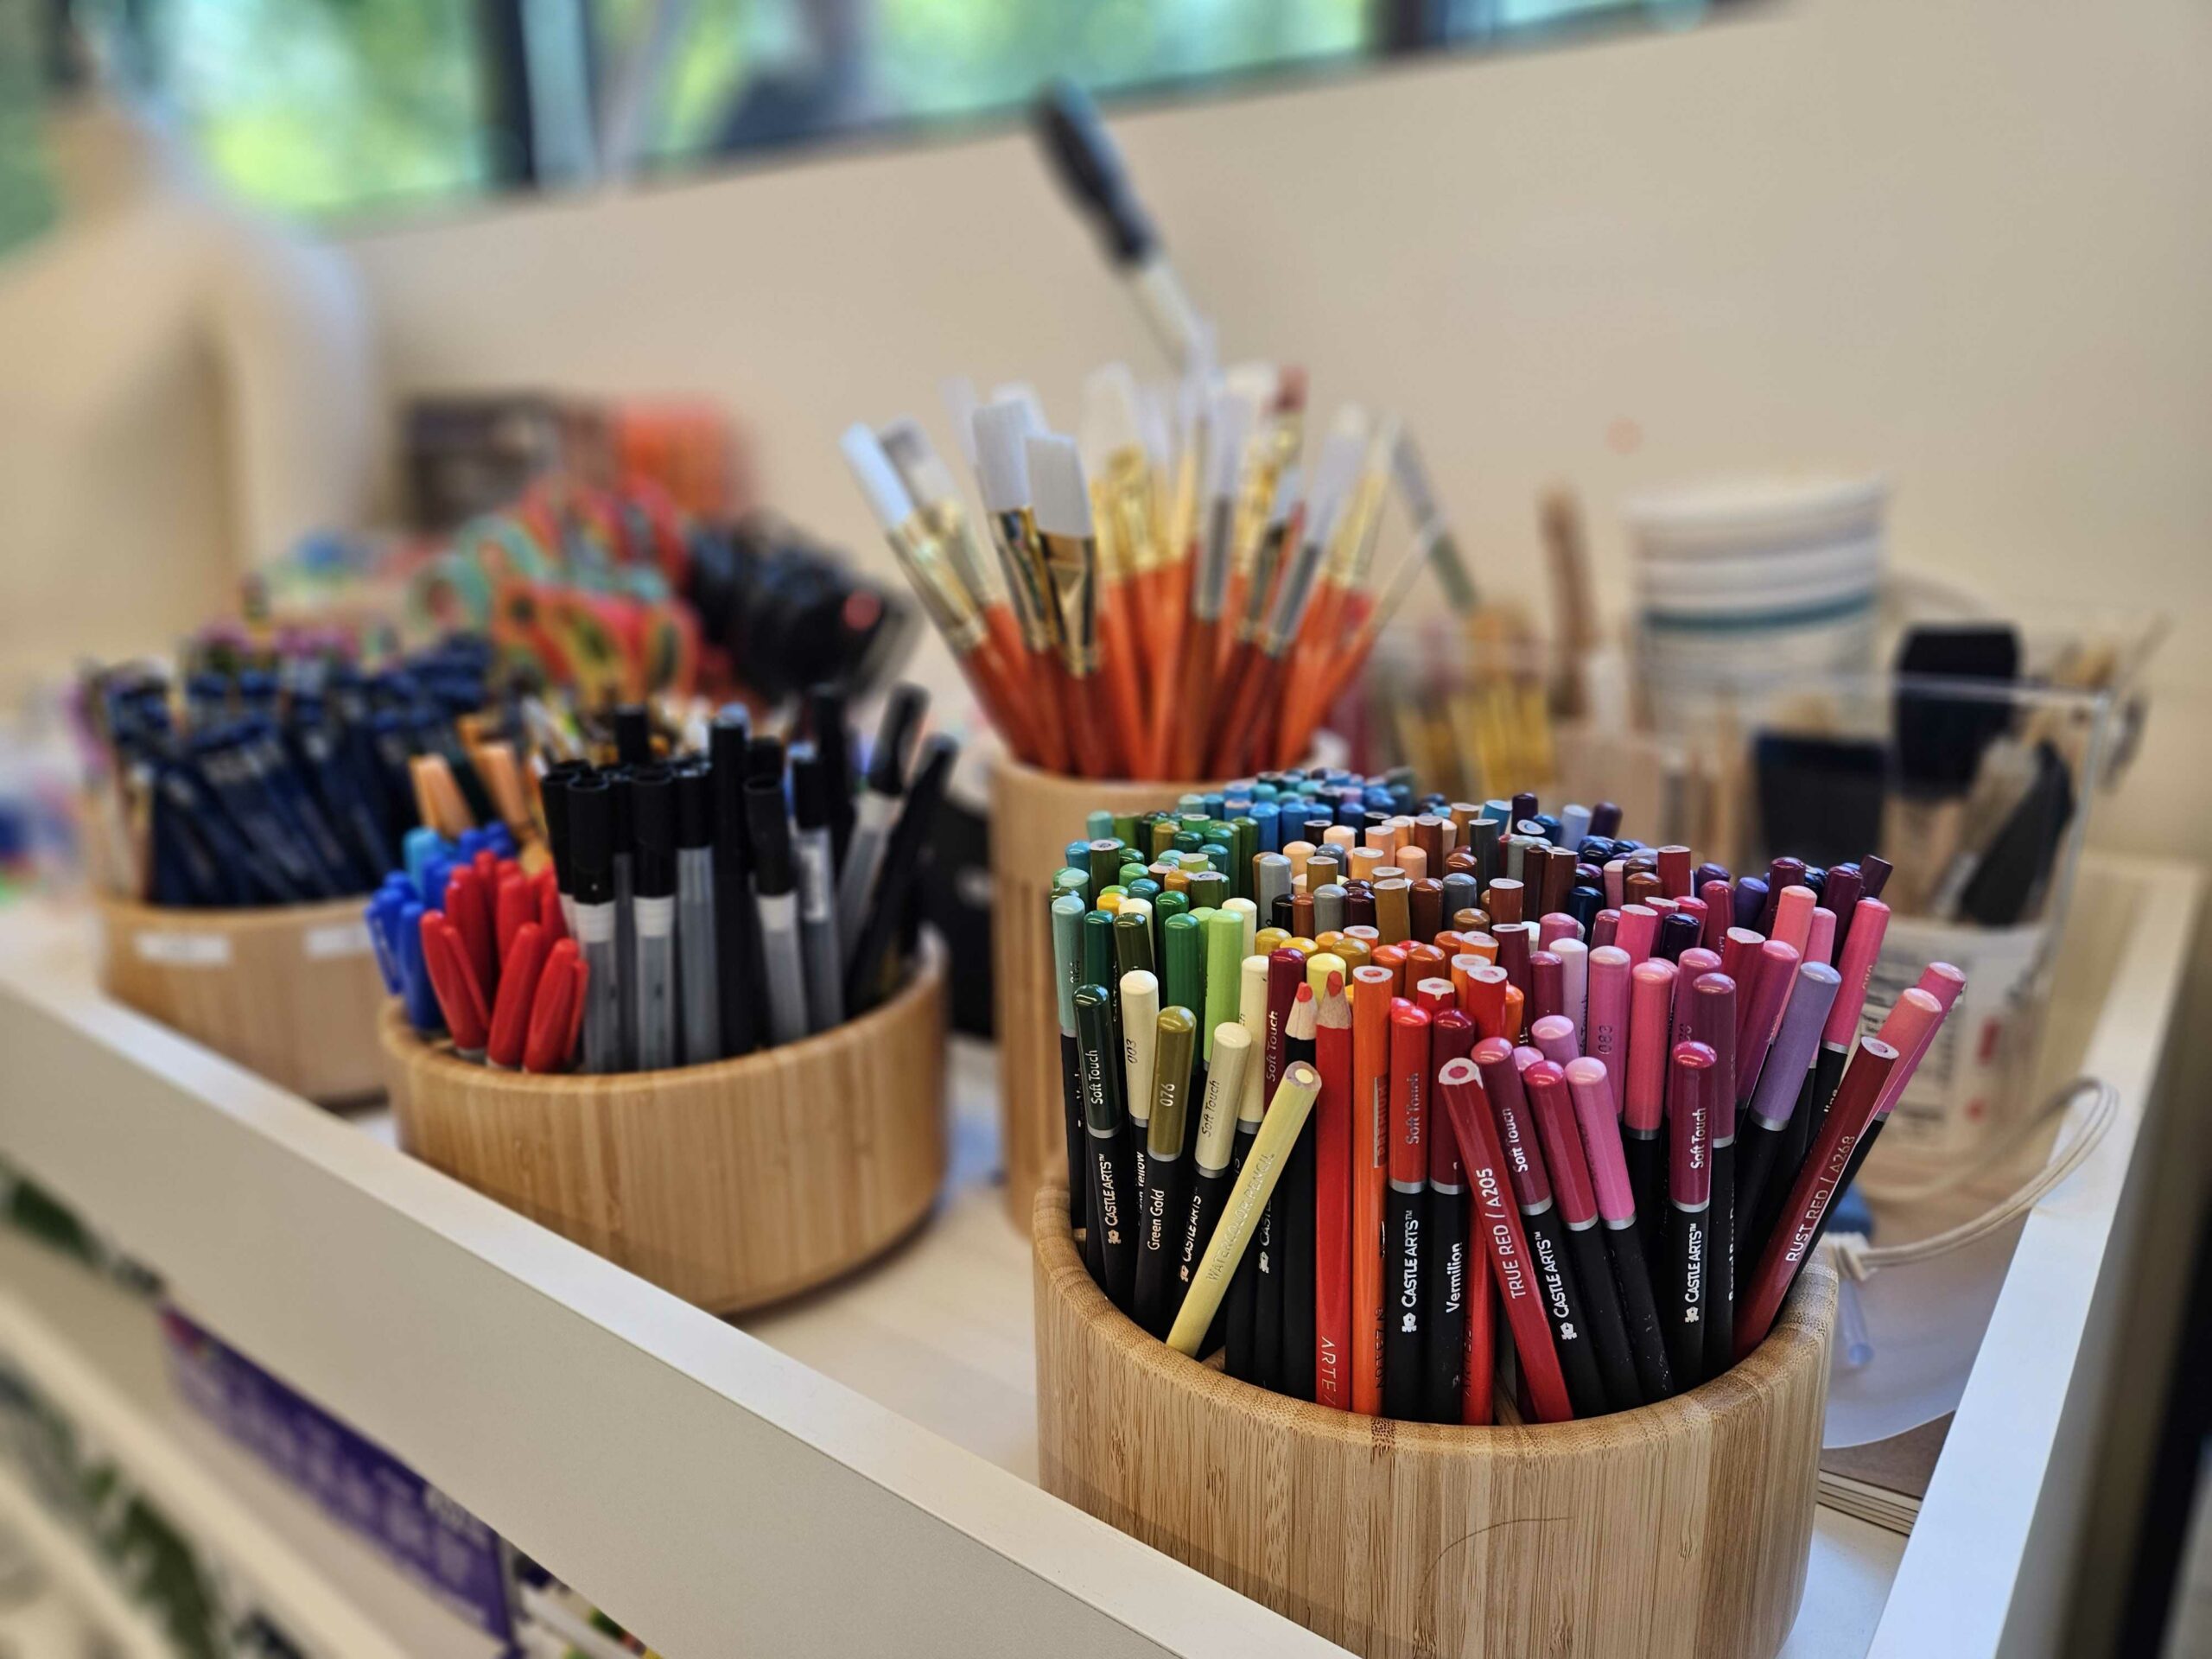 Colorful art supplies neatly organized on a tray in light wooden cups.